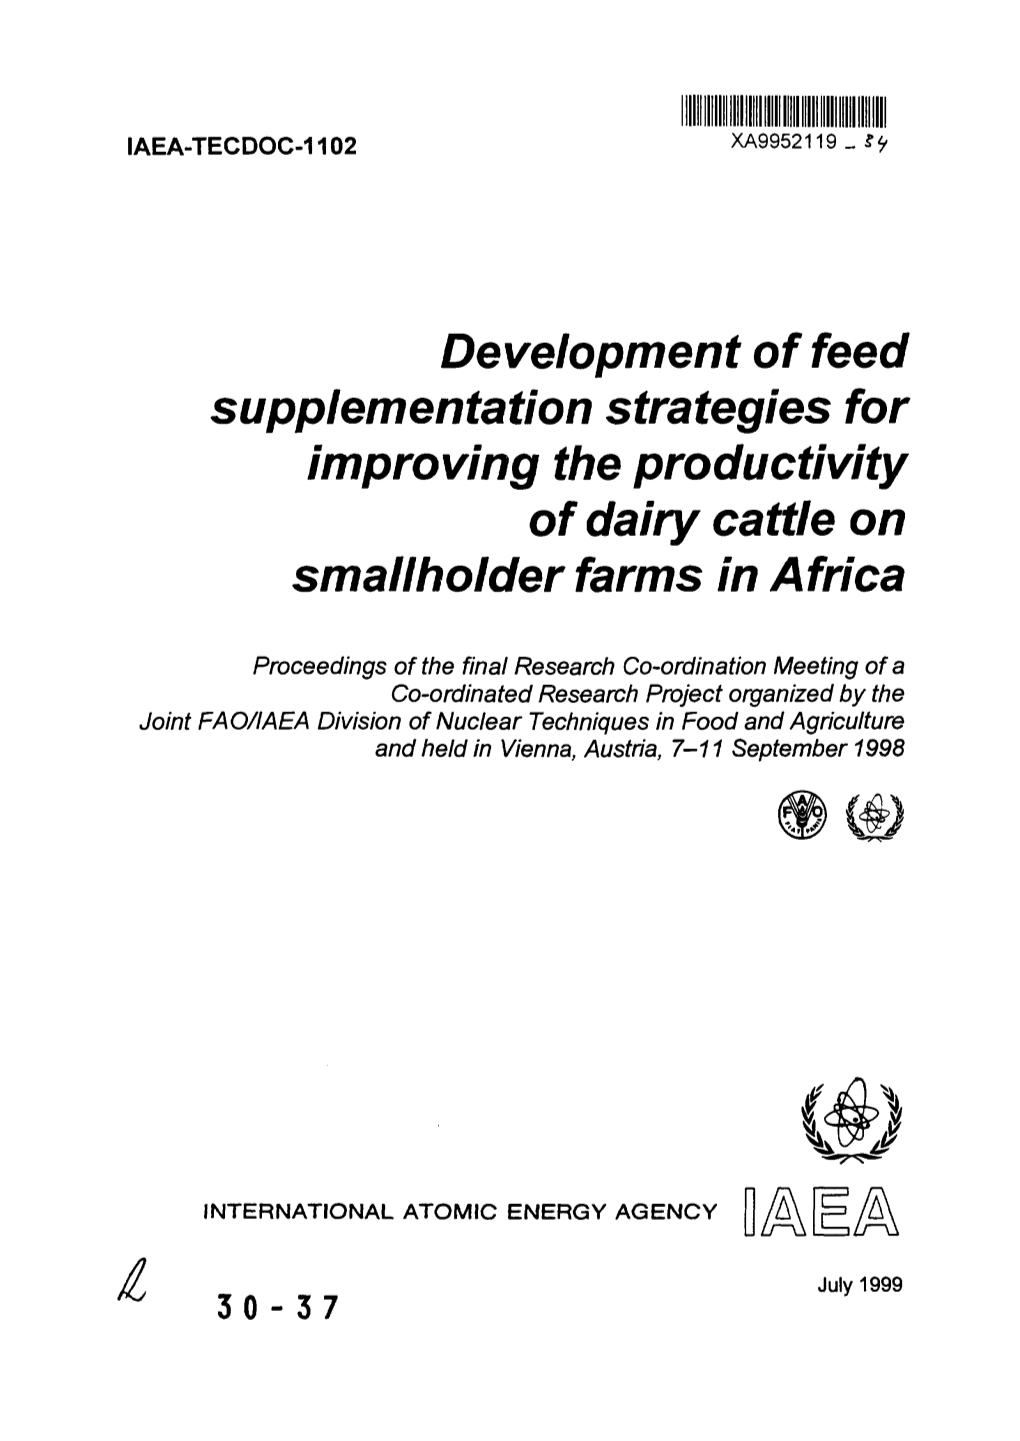 Development of Feed Supplementation Strategies for Improving the Productivity of Dairy Cattle on Smallholder Farms in Africa